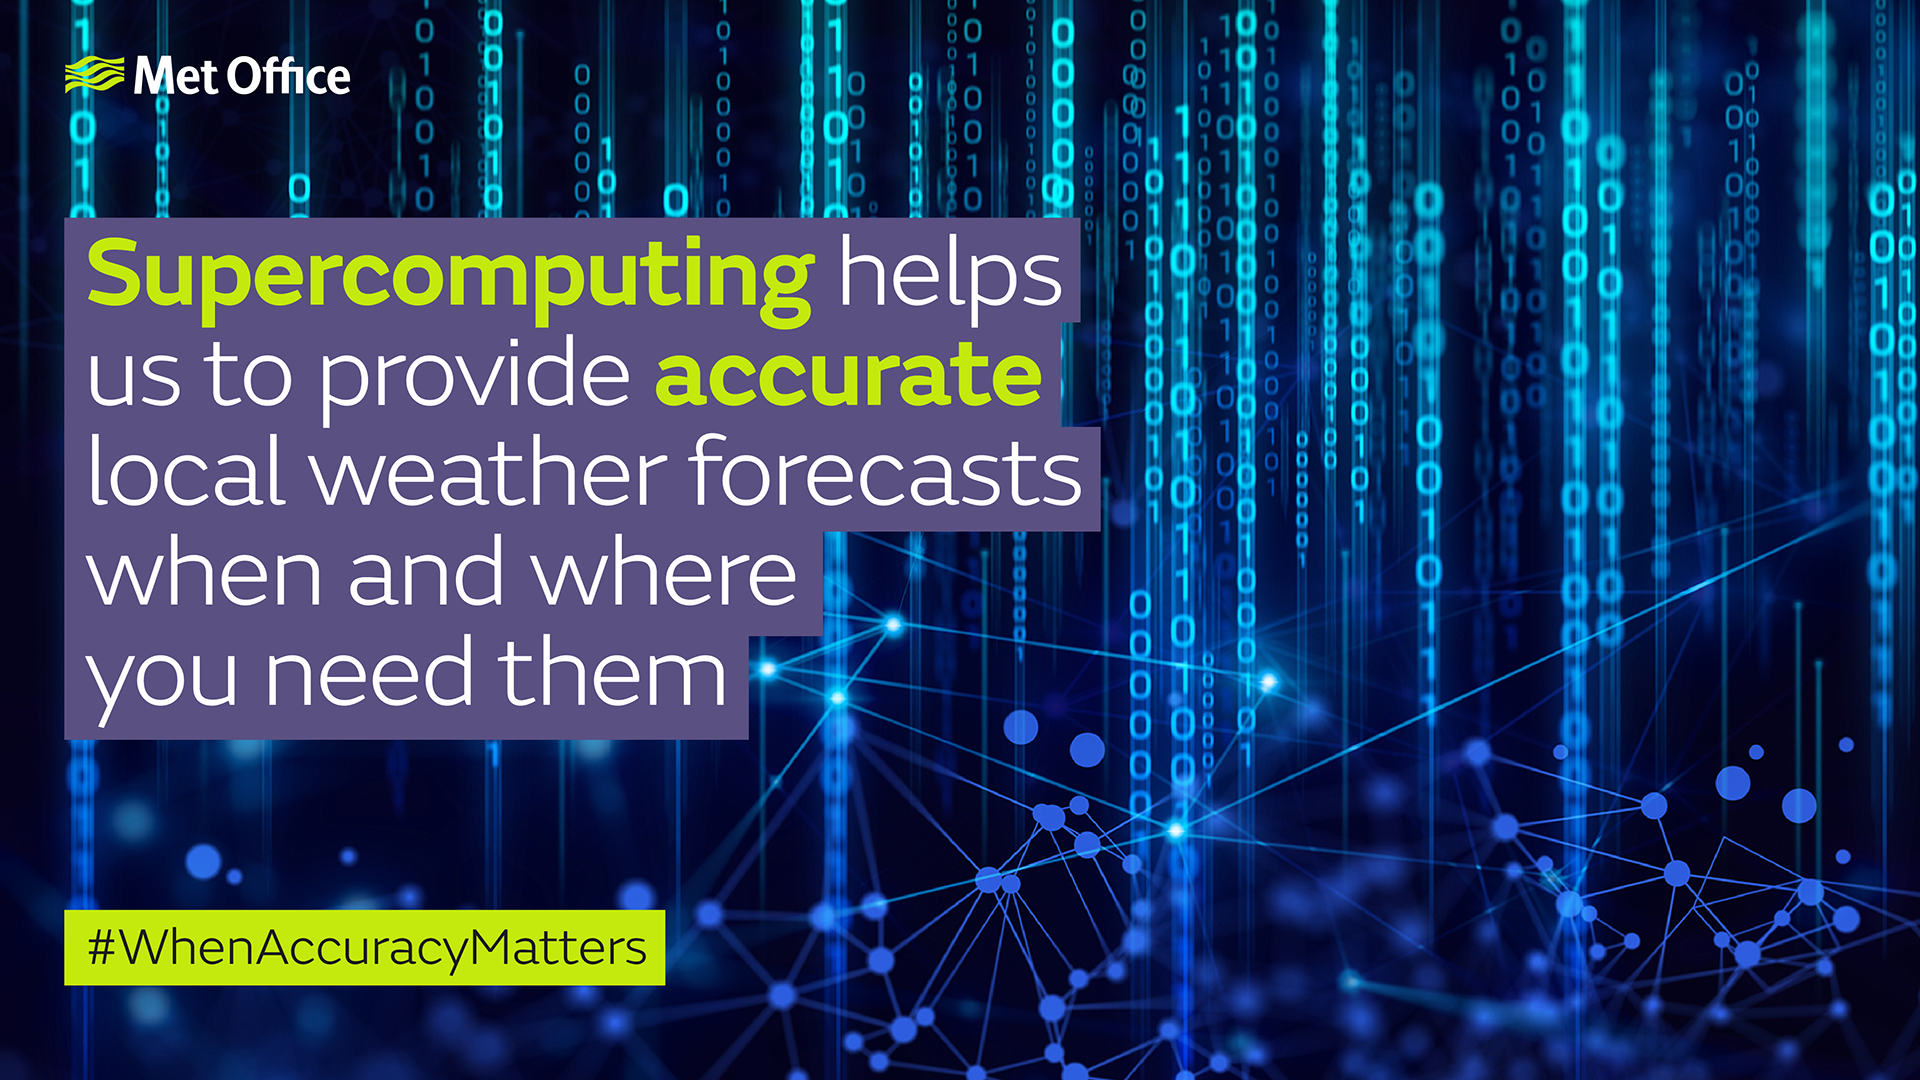 Supercomputing helps us to provide accurate local weather forecasts when and where you need them